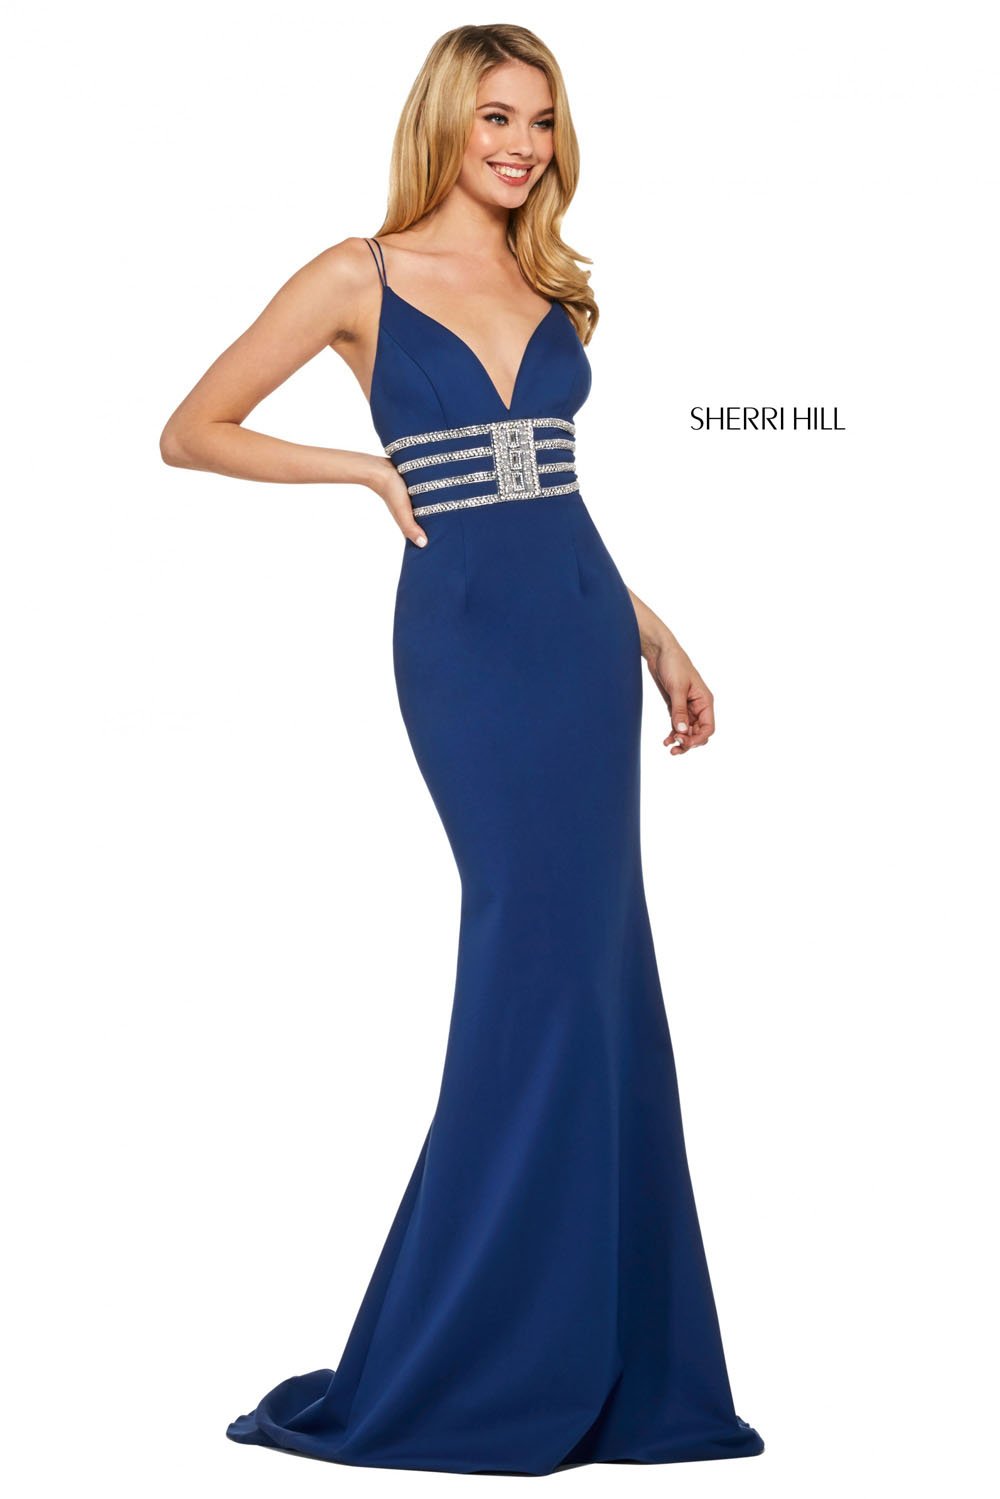 Sherri Hill 53331 dress images in these colors: Emerald, Navy, Black, Candy Pink, Red, Royal, Ivory, Light Blue, Yellow, Orange.